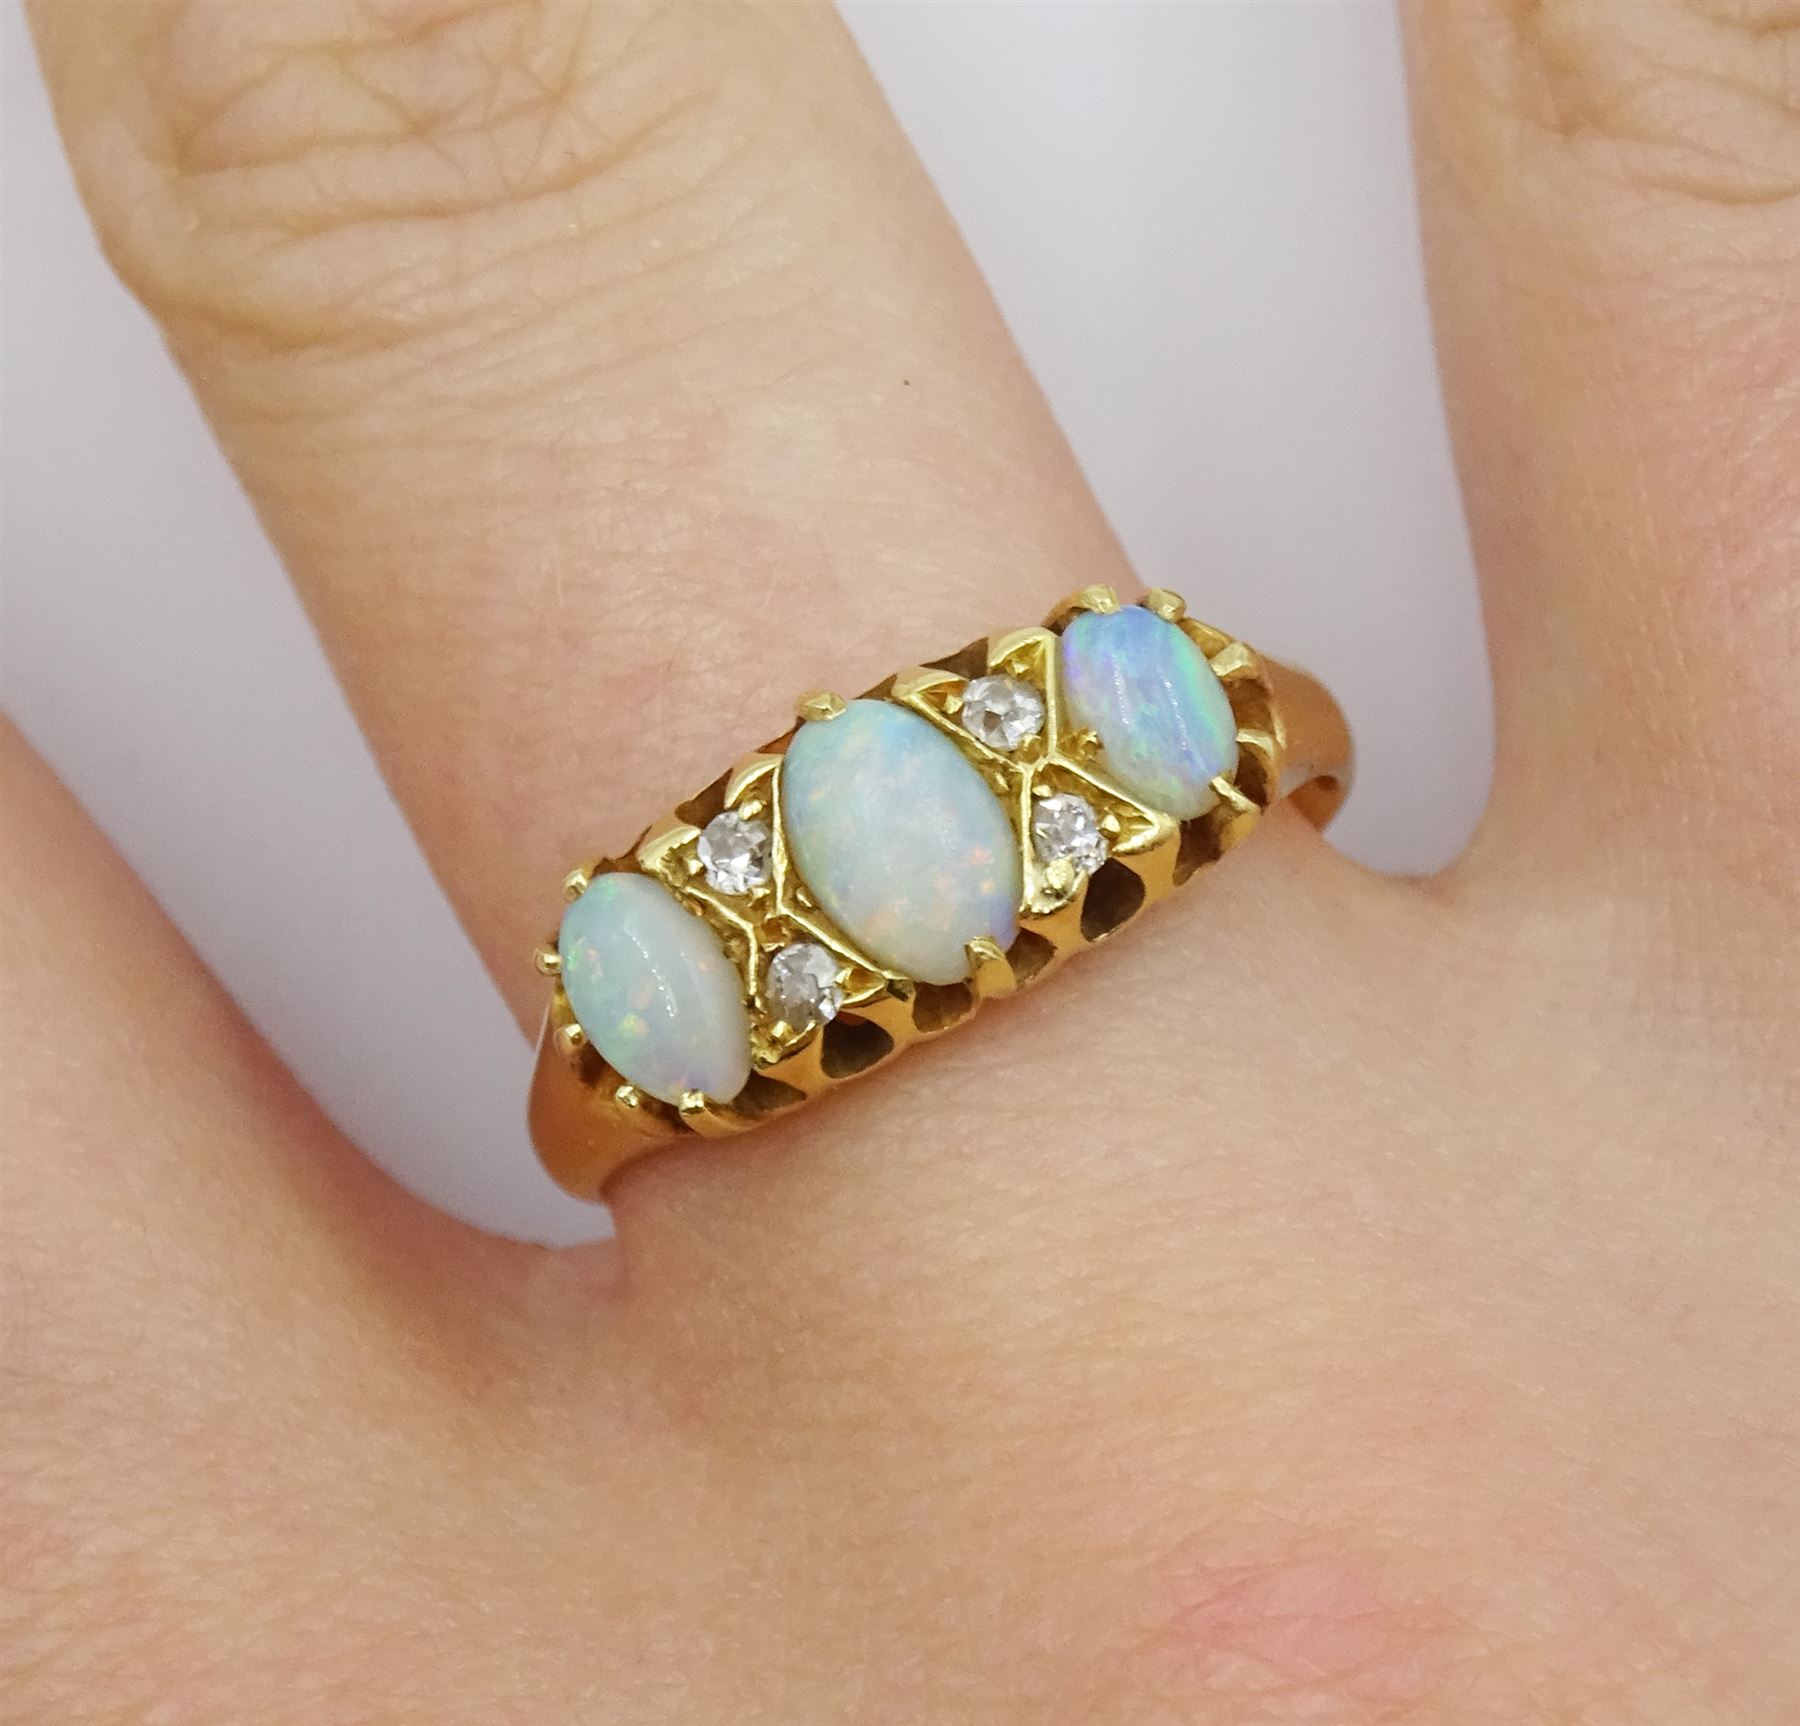 Edwardian 18ct gold opal and diamond ring - Image 2 of 5